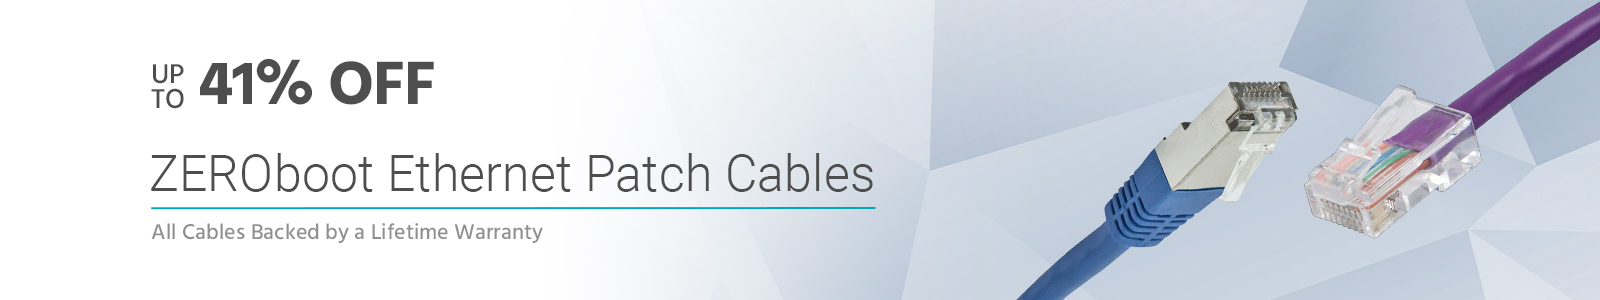 Up to 41% off
ZEROboot Ethernet Patch Cables
All cables Backed by a Lifetime Warranty
Shop Now